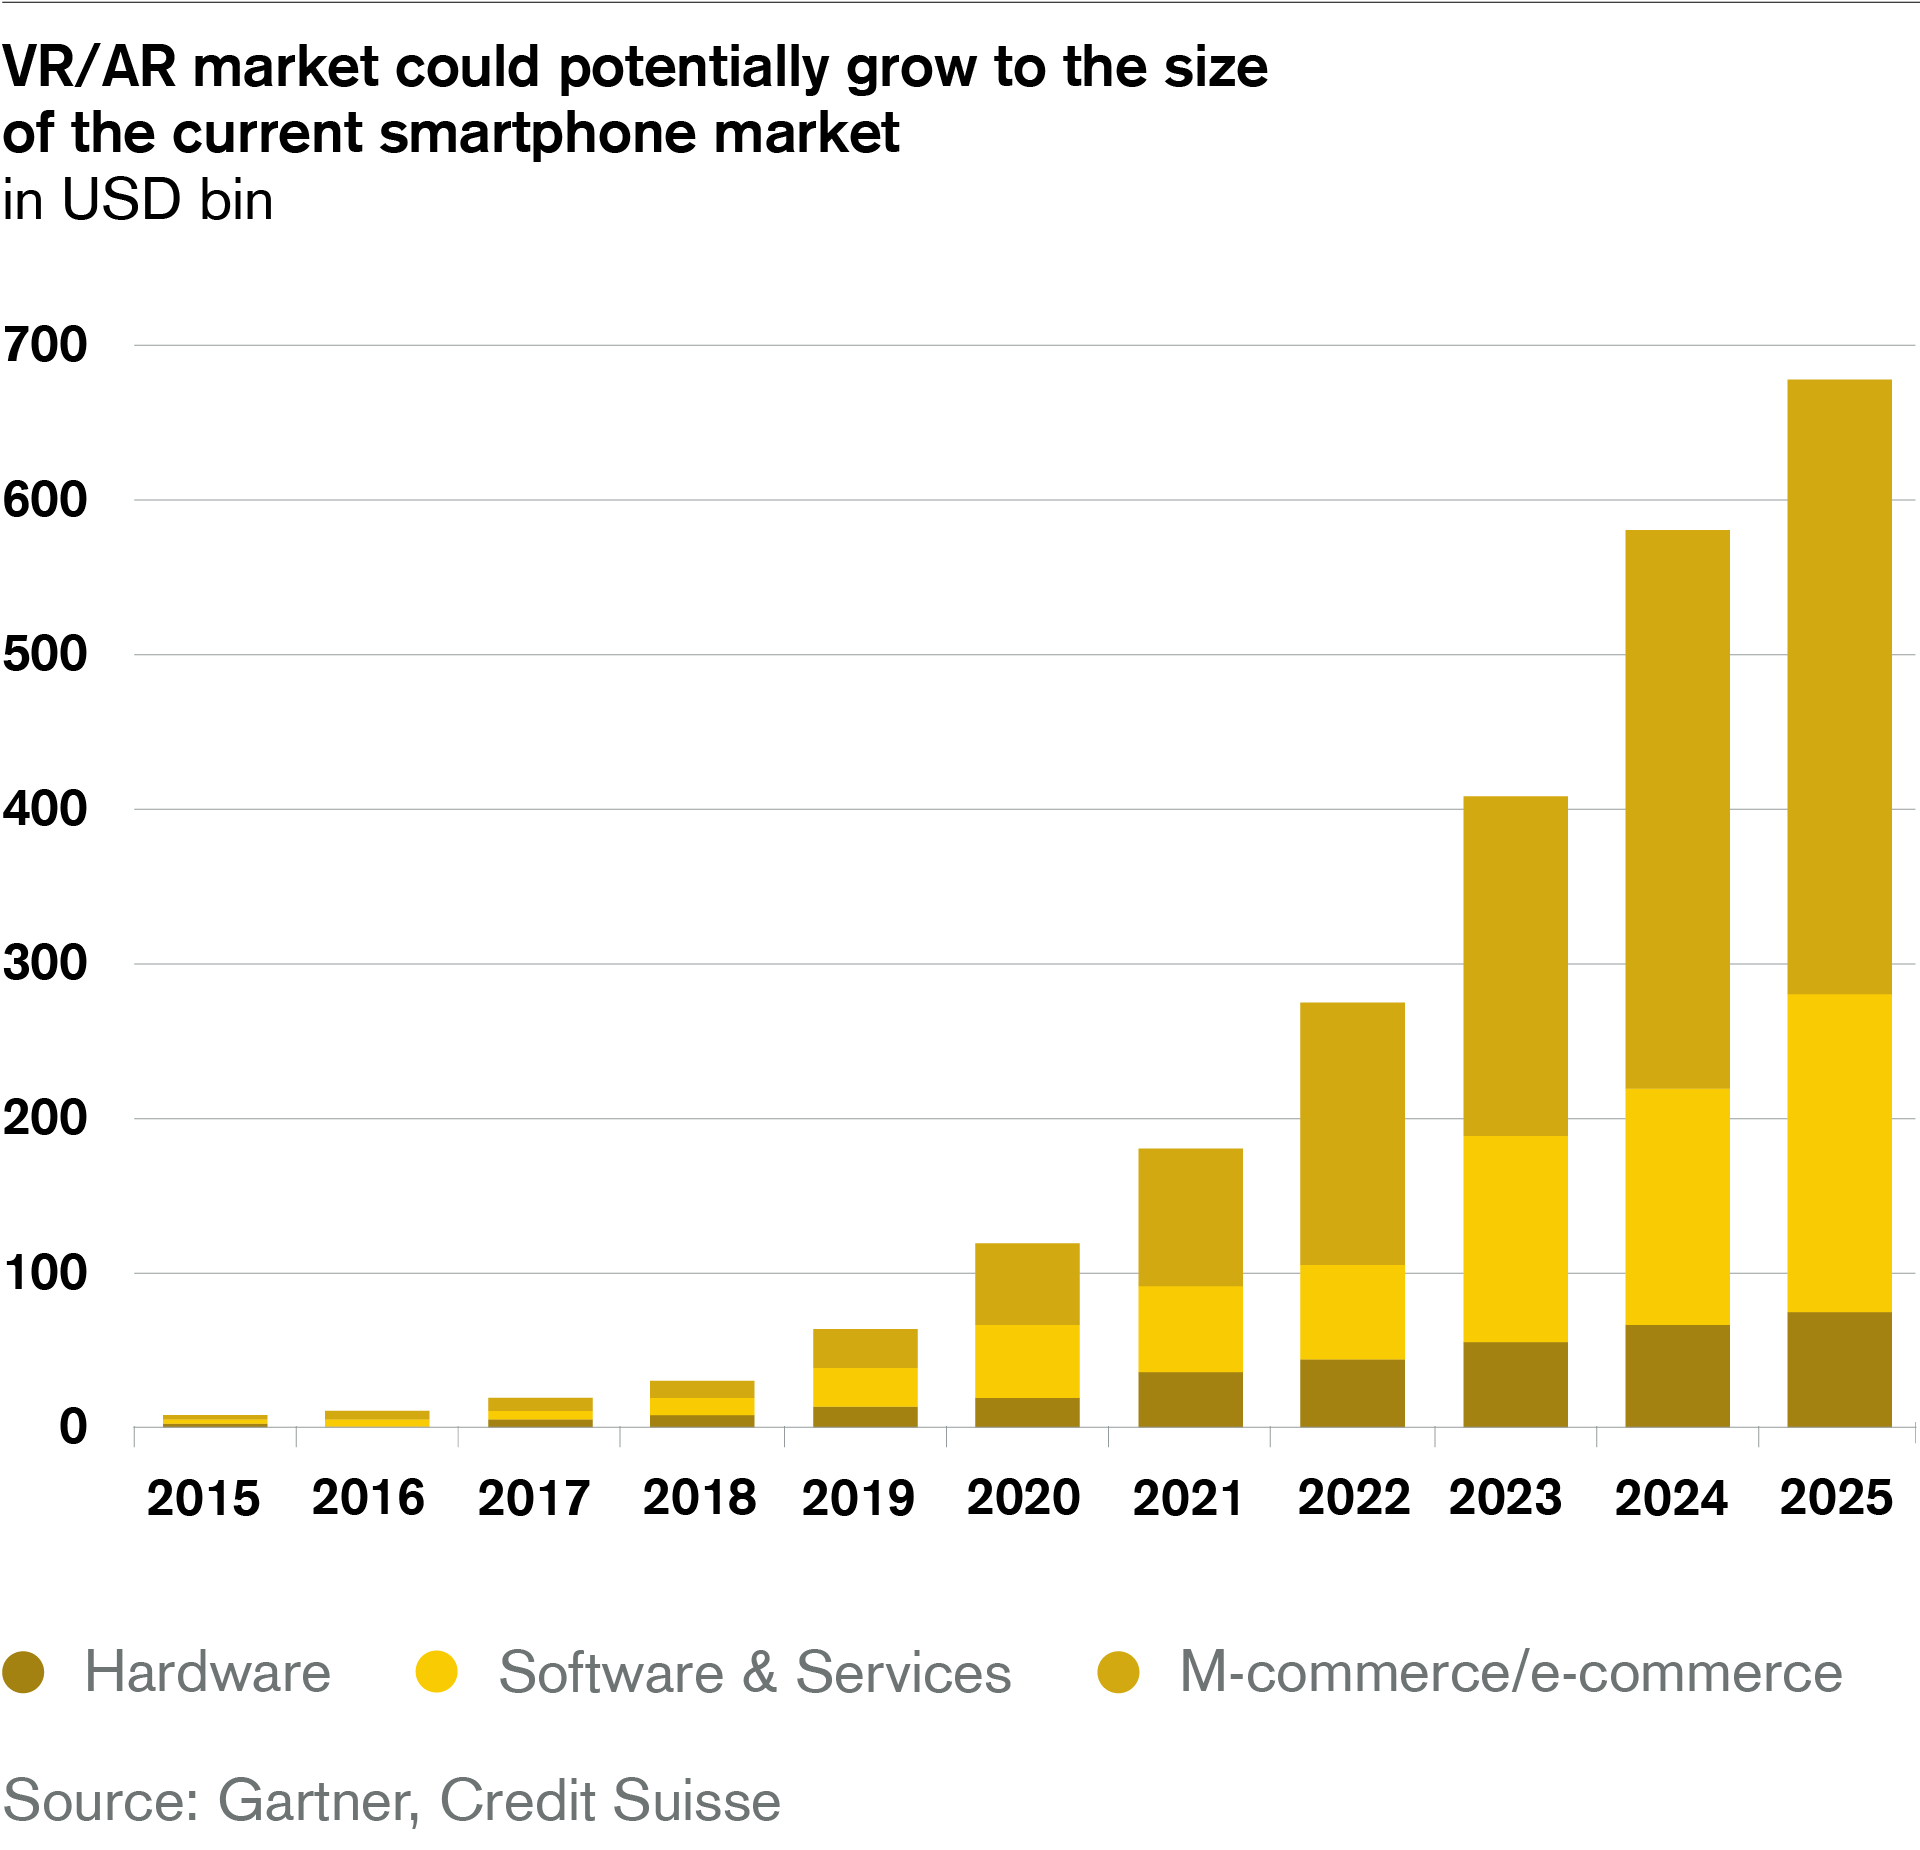 VR/AR market could potentially grow to the size of the current smartphone market